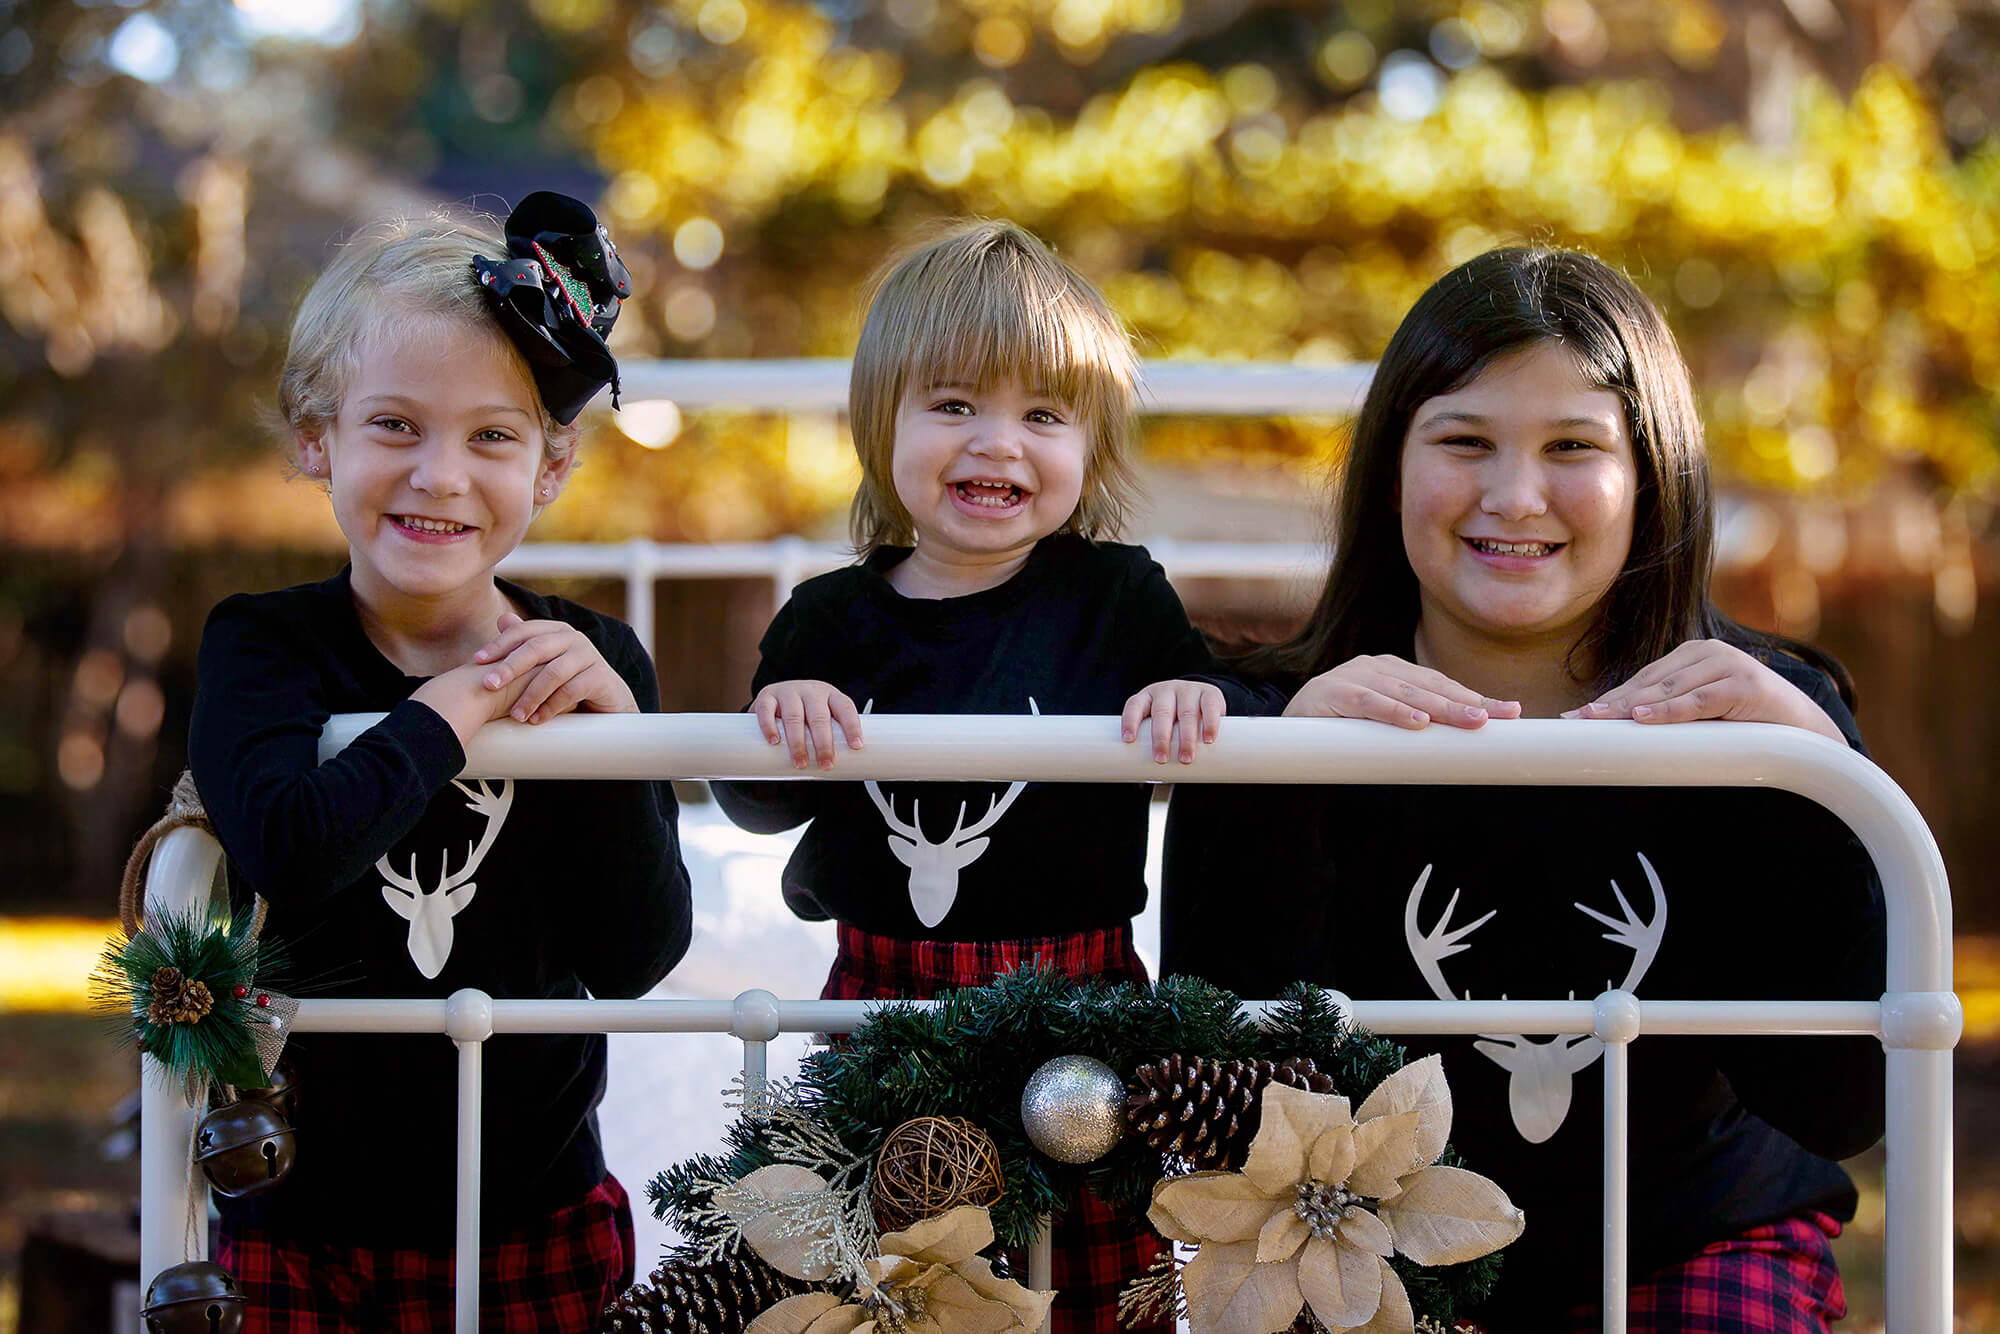 Adorable girls in their Christmas outfits ready to go see Christmas lights in Houston, Texas.